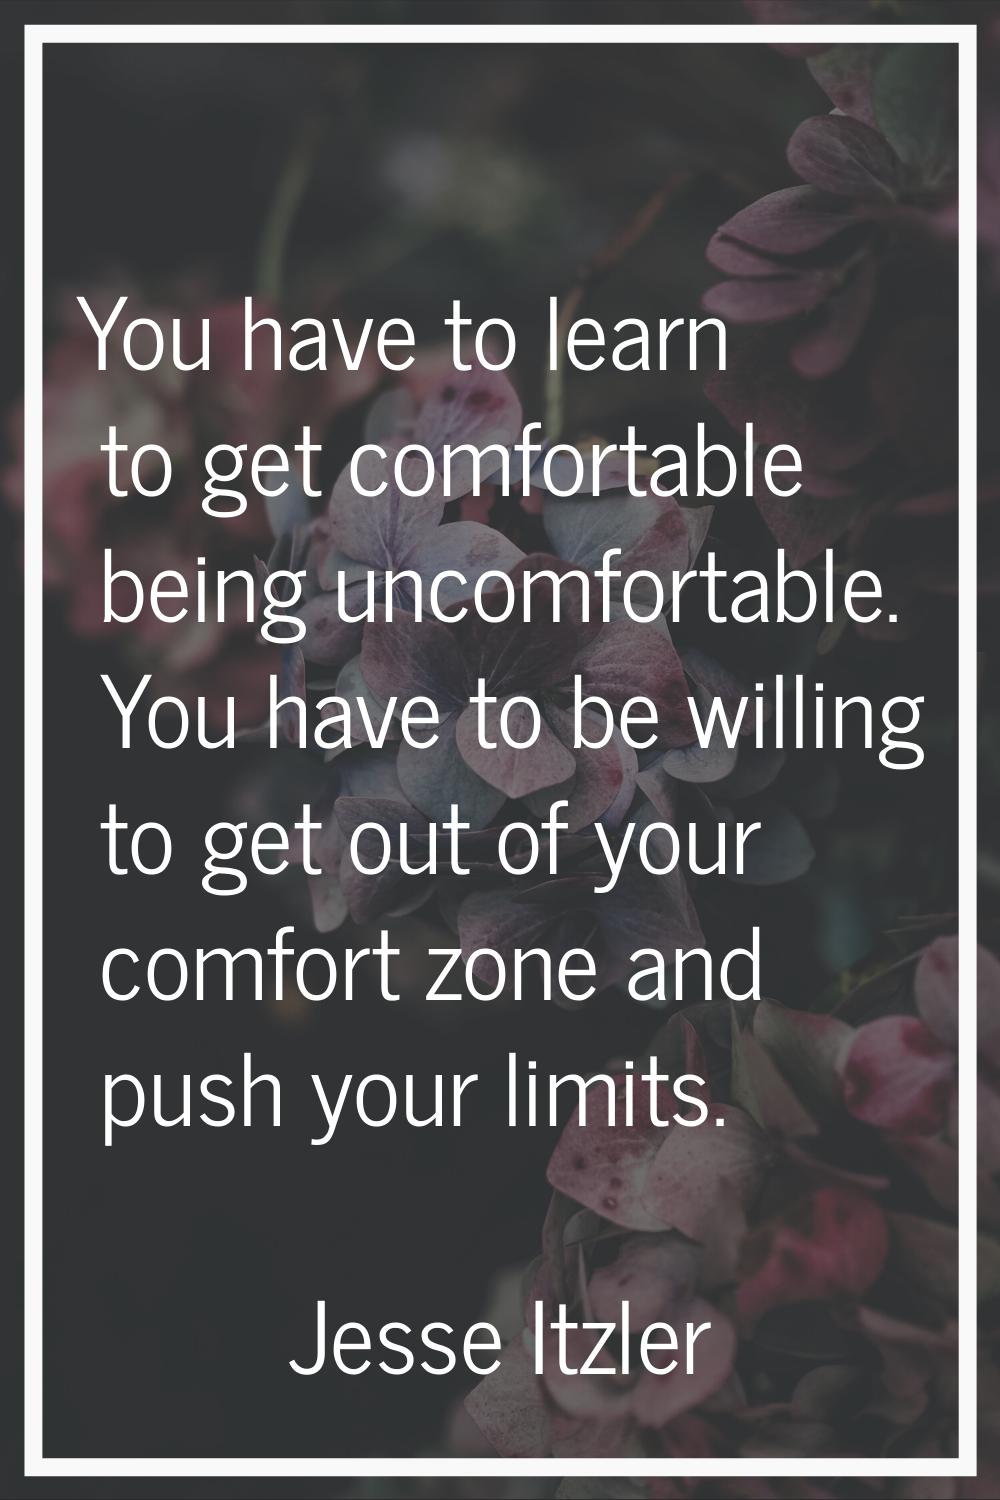 You have to learn to get comfortable being uncomfortable. You have to be willing to get out of your